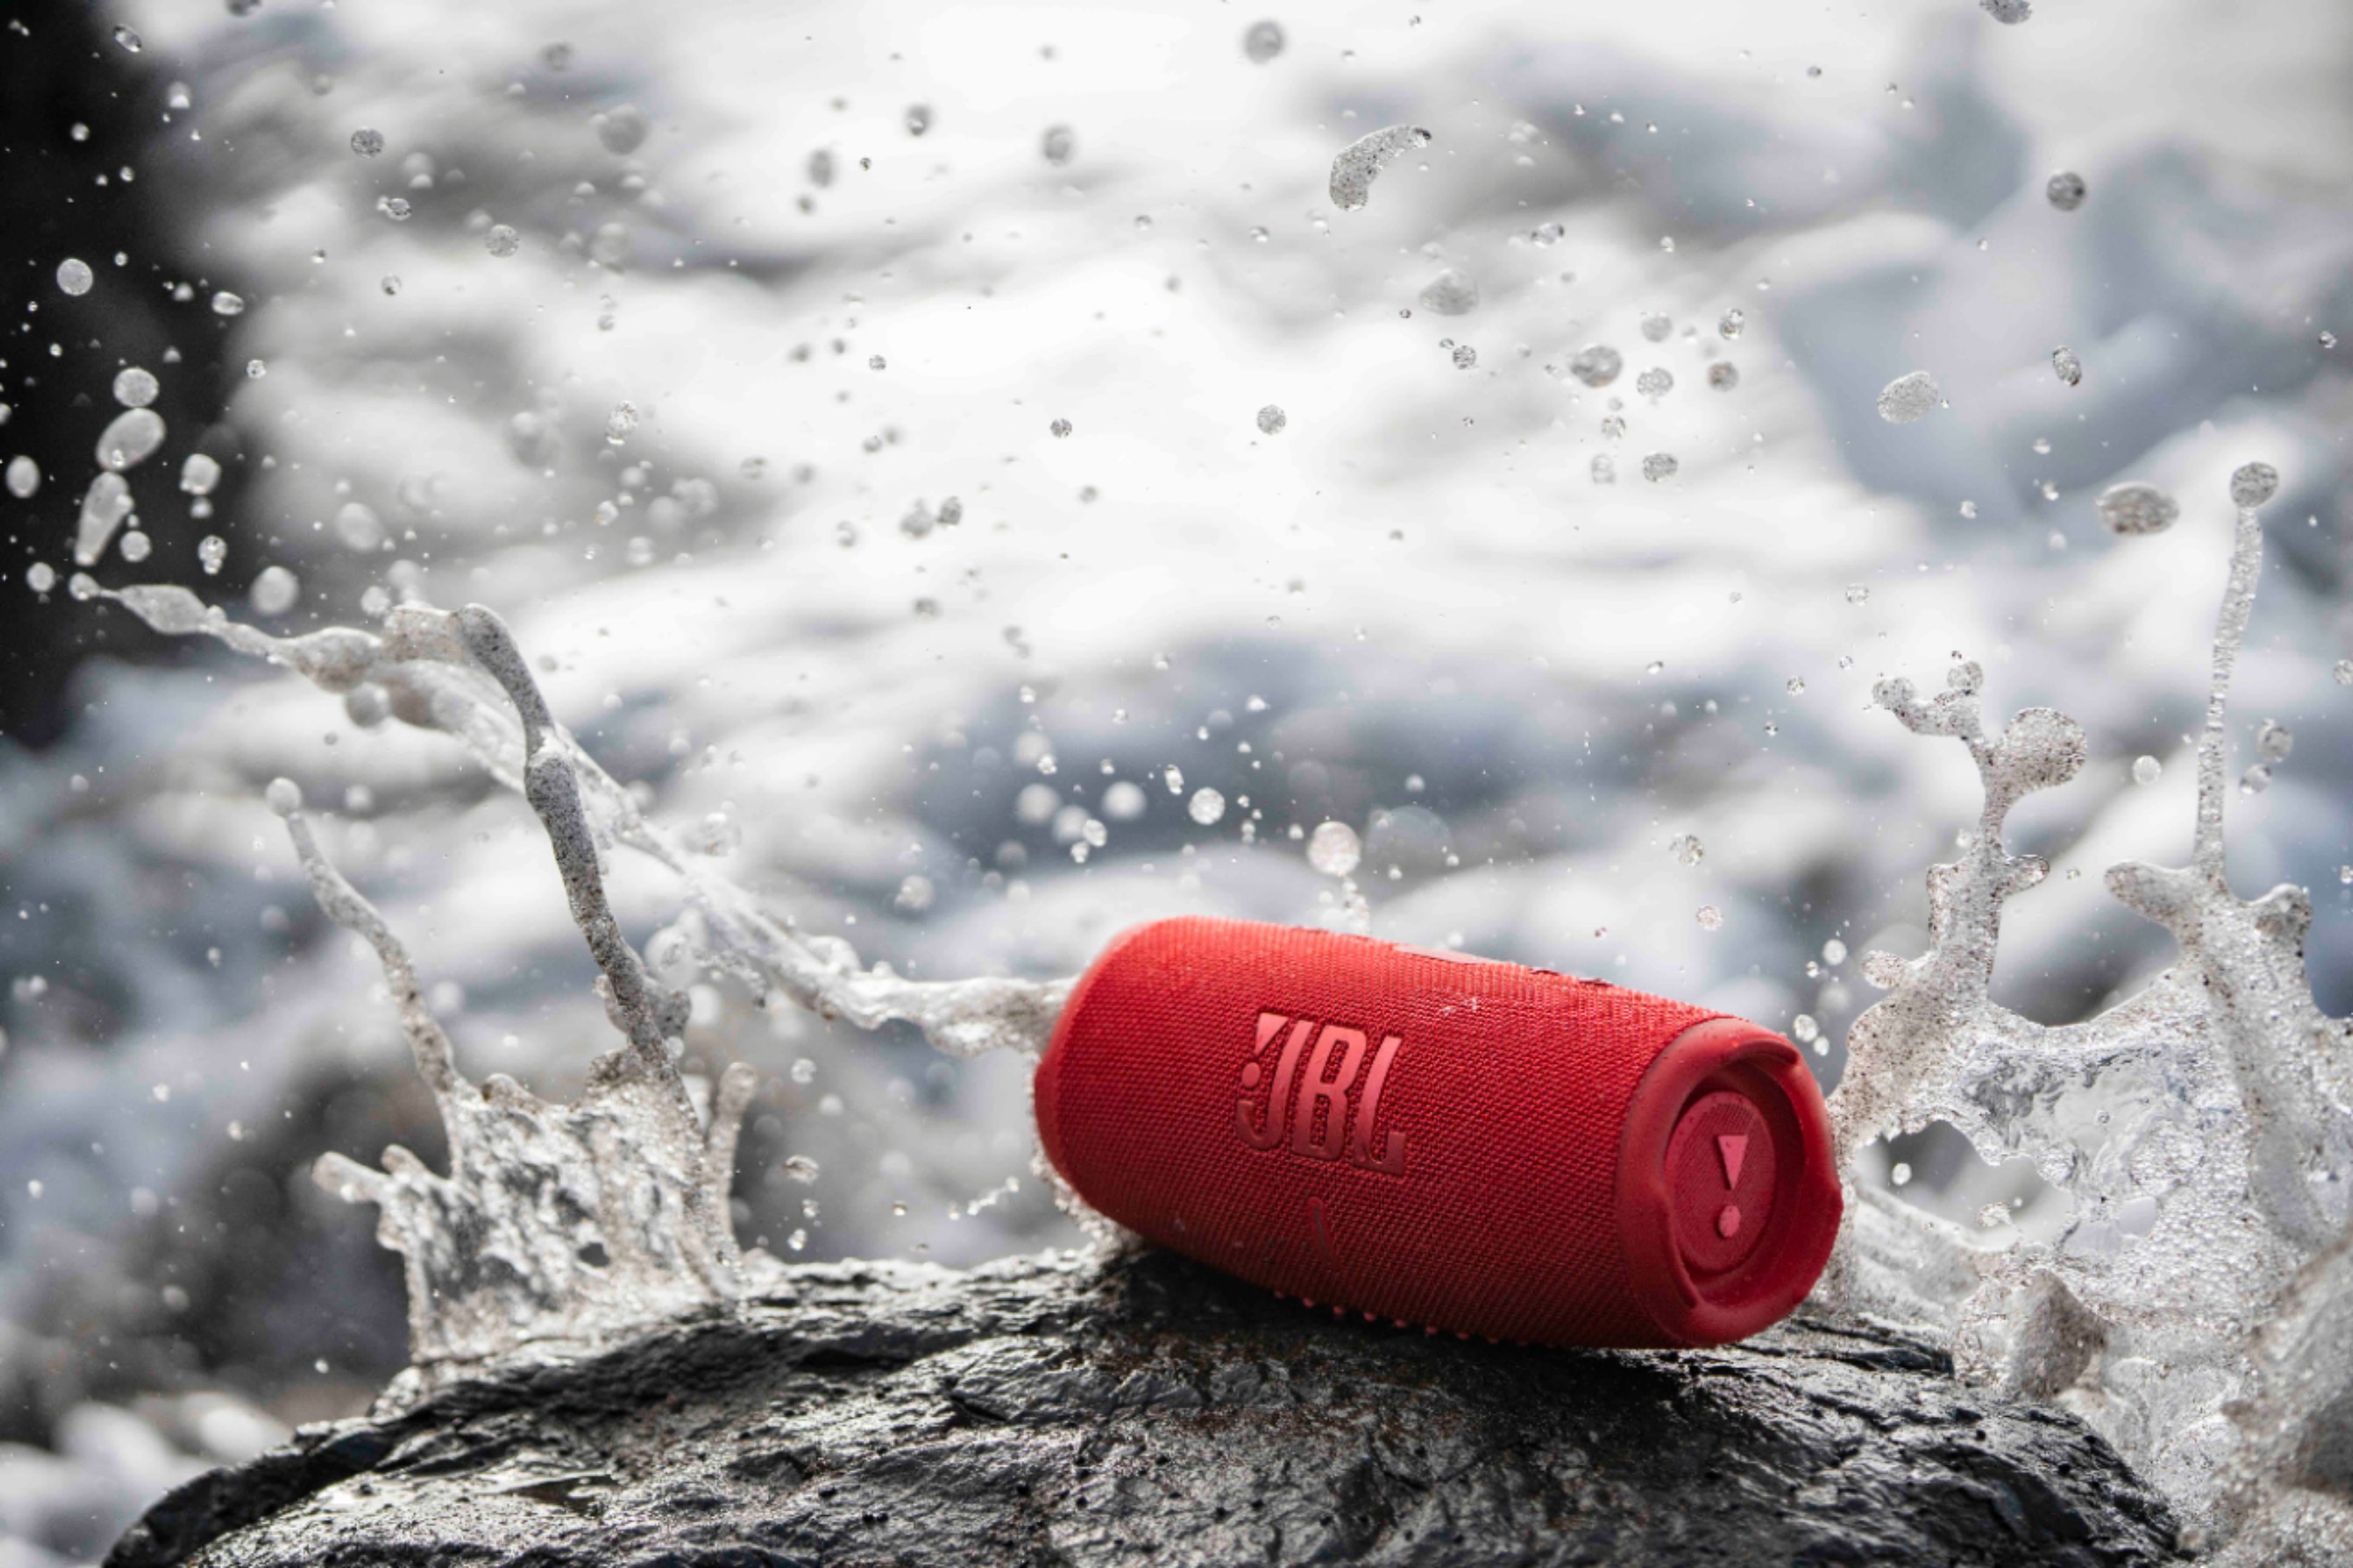 JBL Charge 5 Red Portable Wireless Bluetooth Speaker - Red 